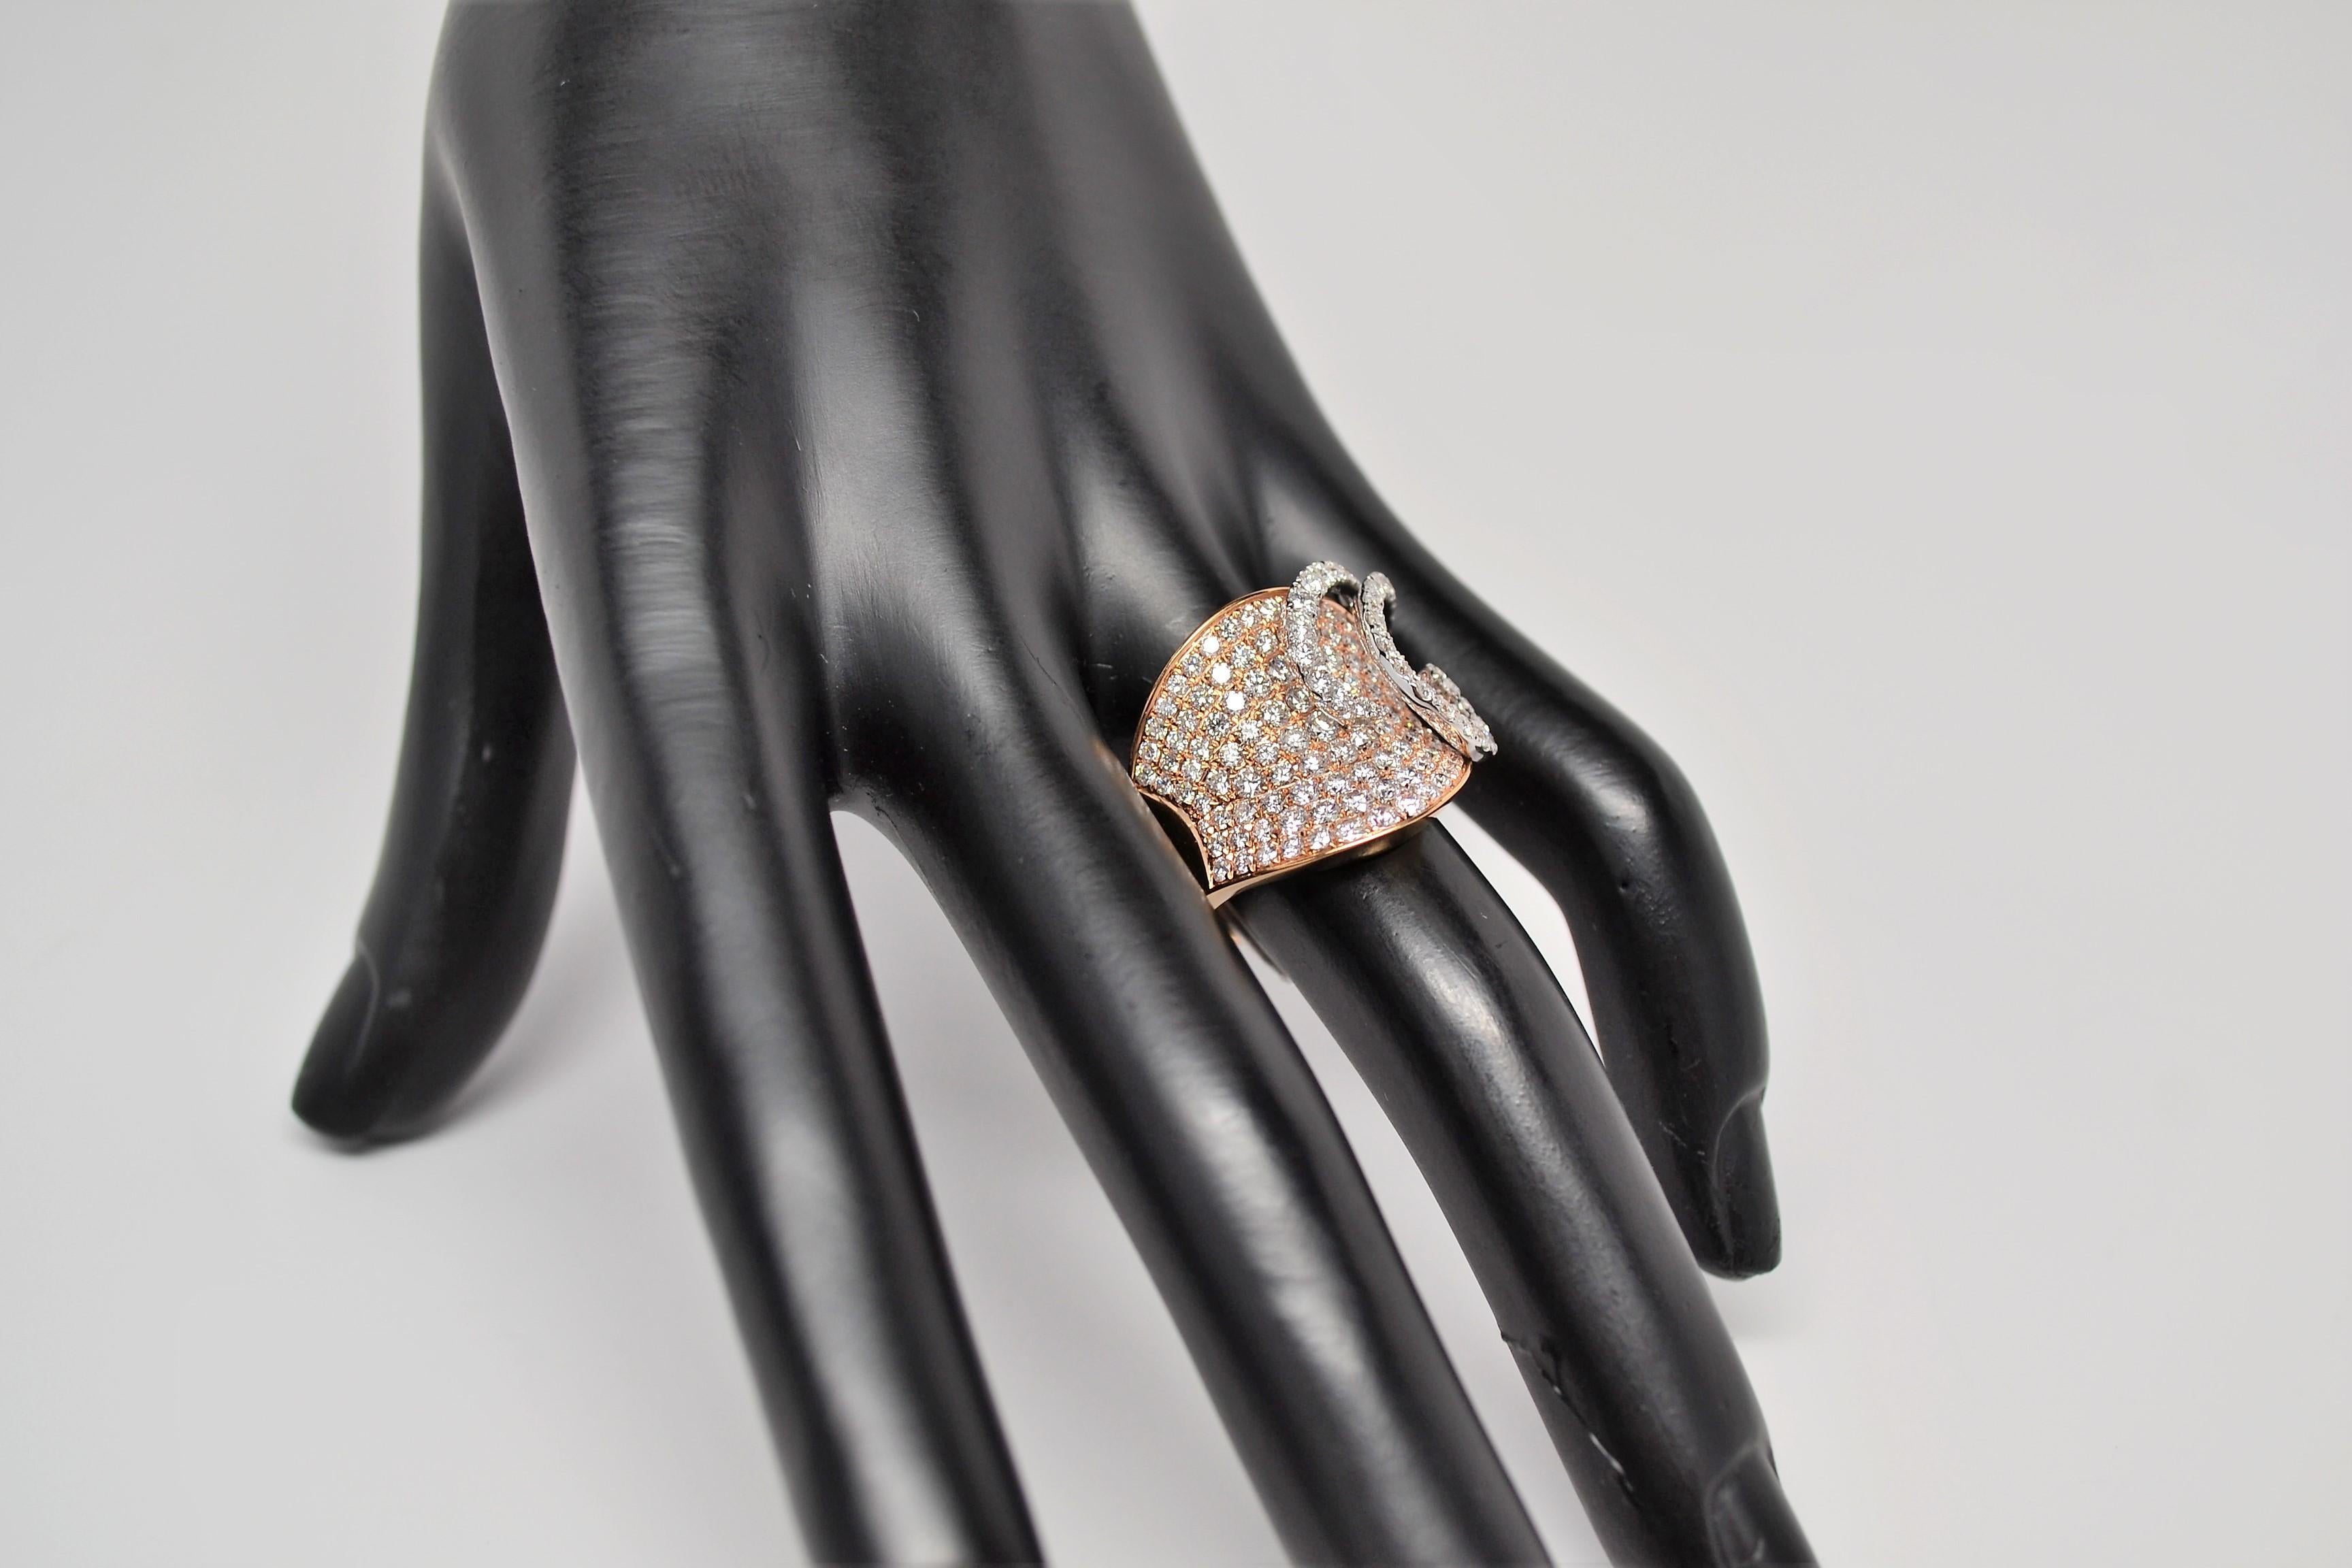 18k White Gold & 18k Rose Gold Diamond Ring with 3.14 Carats For Sale 5